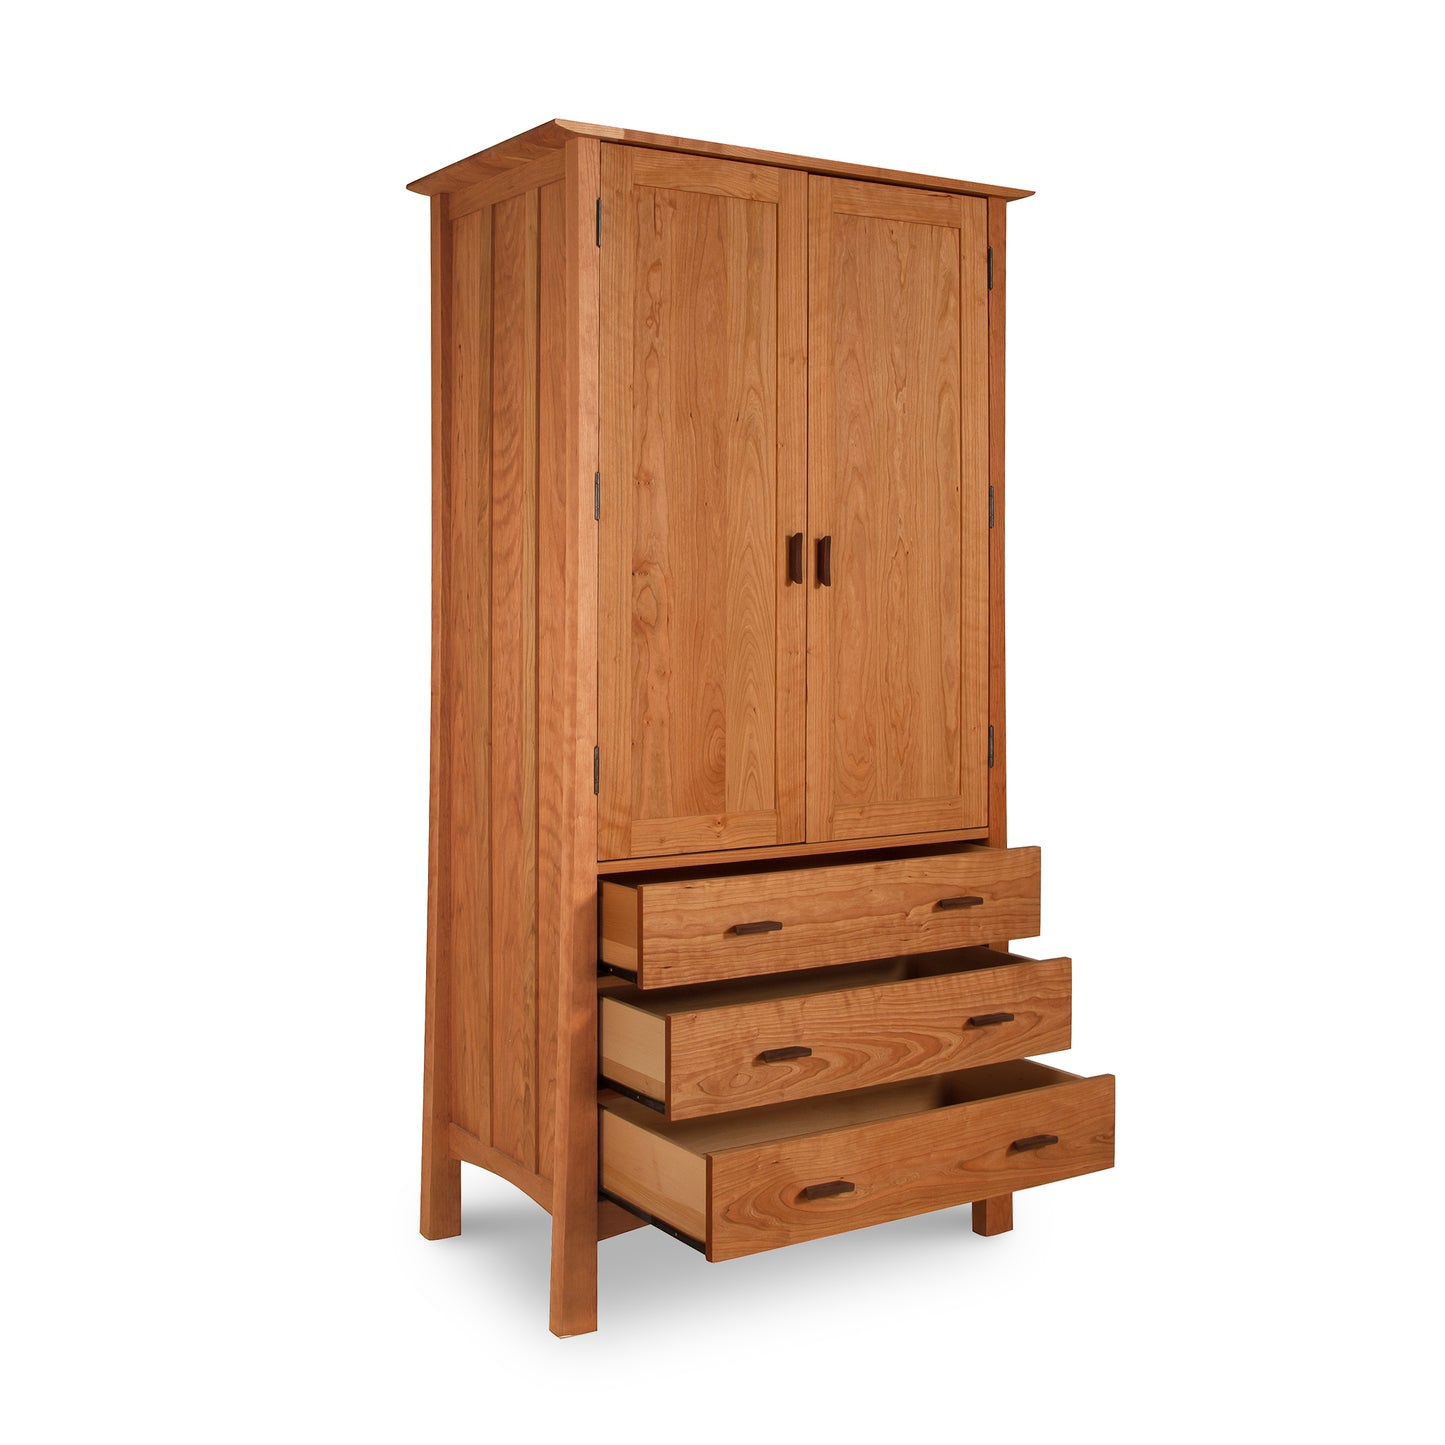 Contemporary Craftsman Tall Armoire by Vermont Furniture Designs, with three open drawers on a white background, showcasing Vermont craftsmanship.